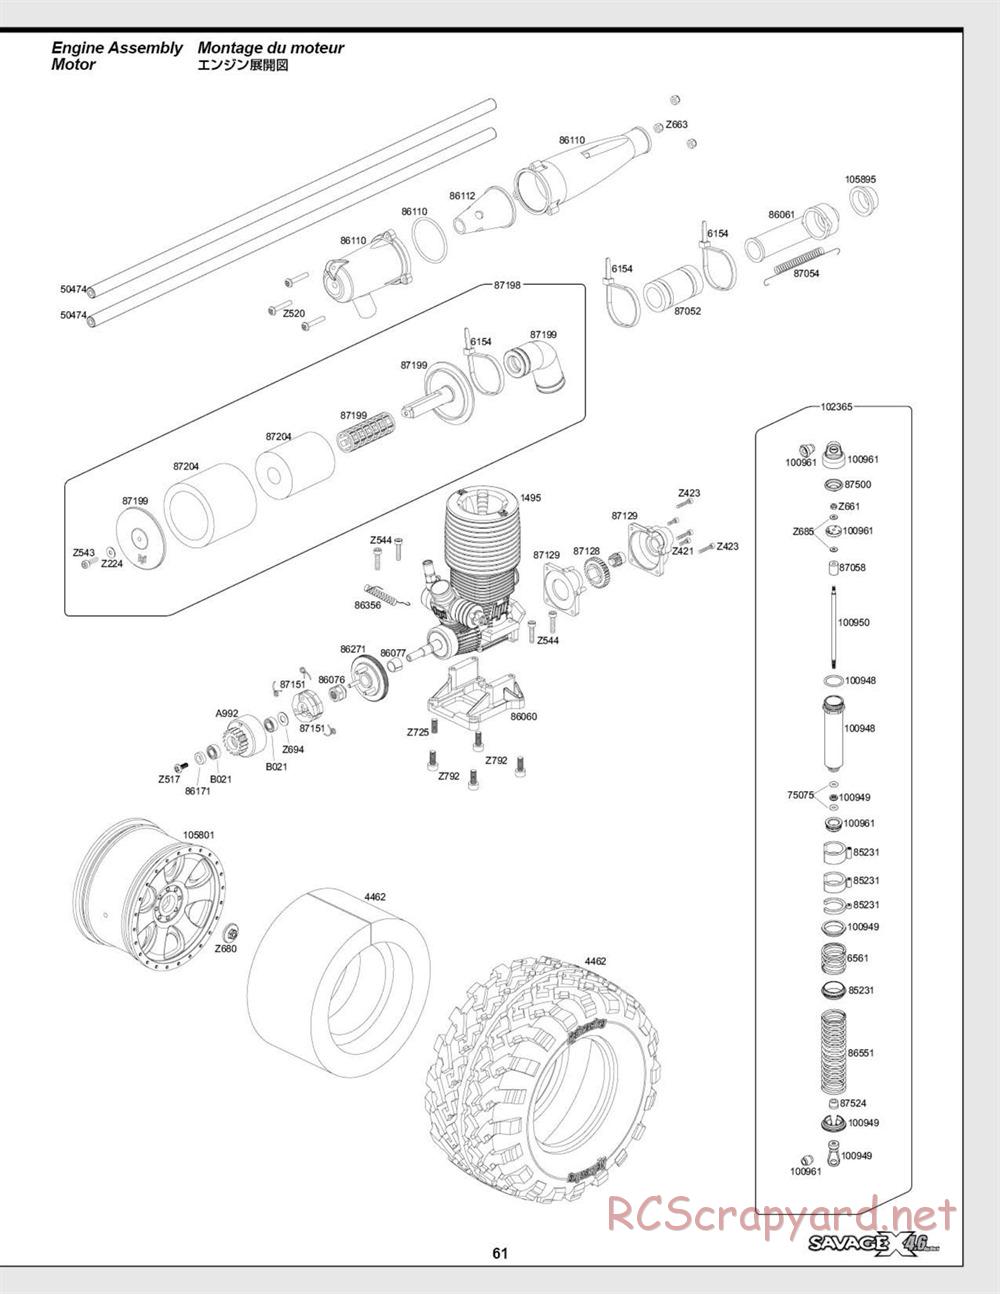 HPI - Savage X 4.6 - Exploded View - Page 61